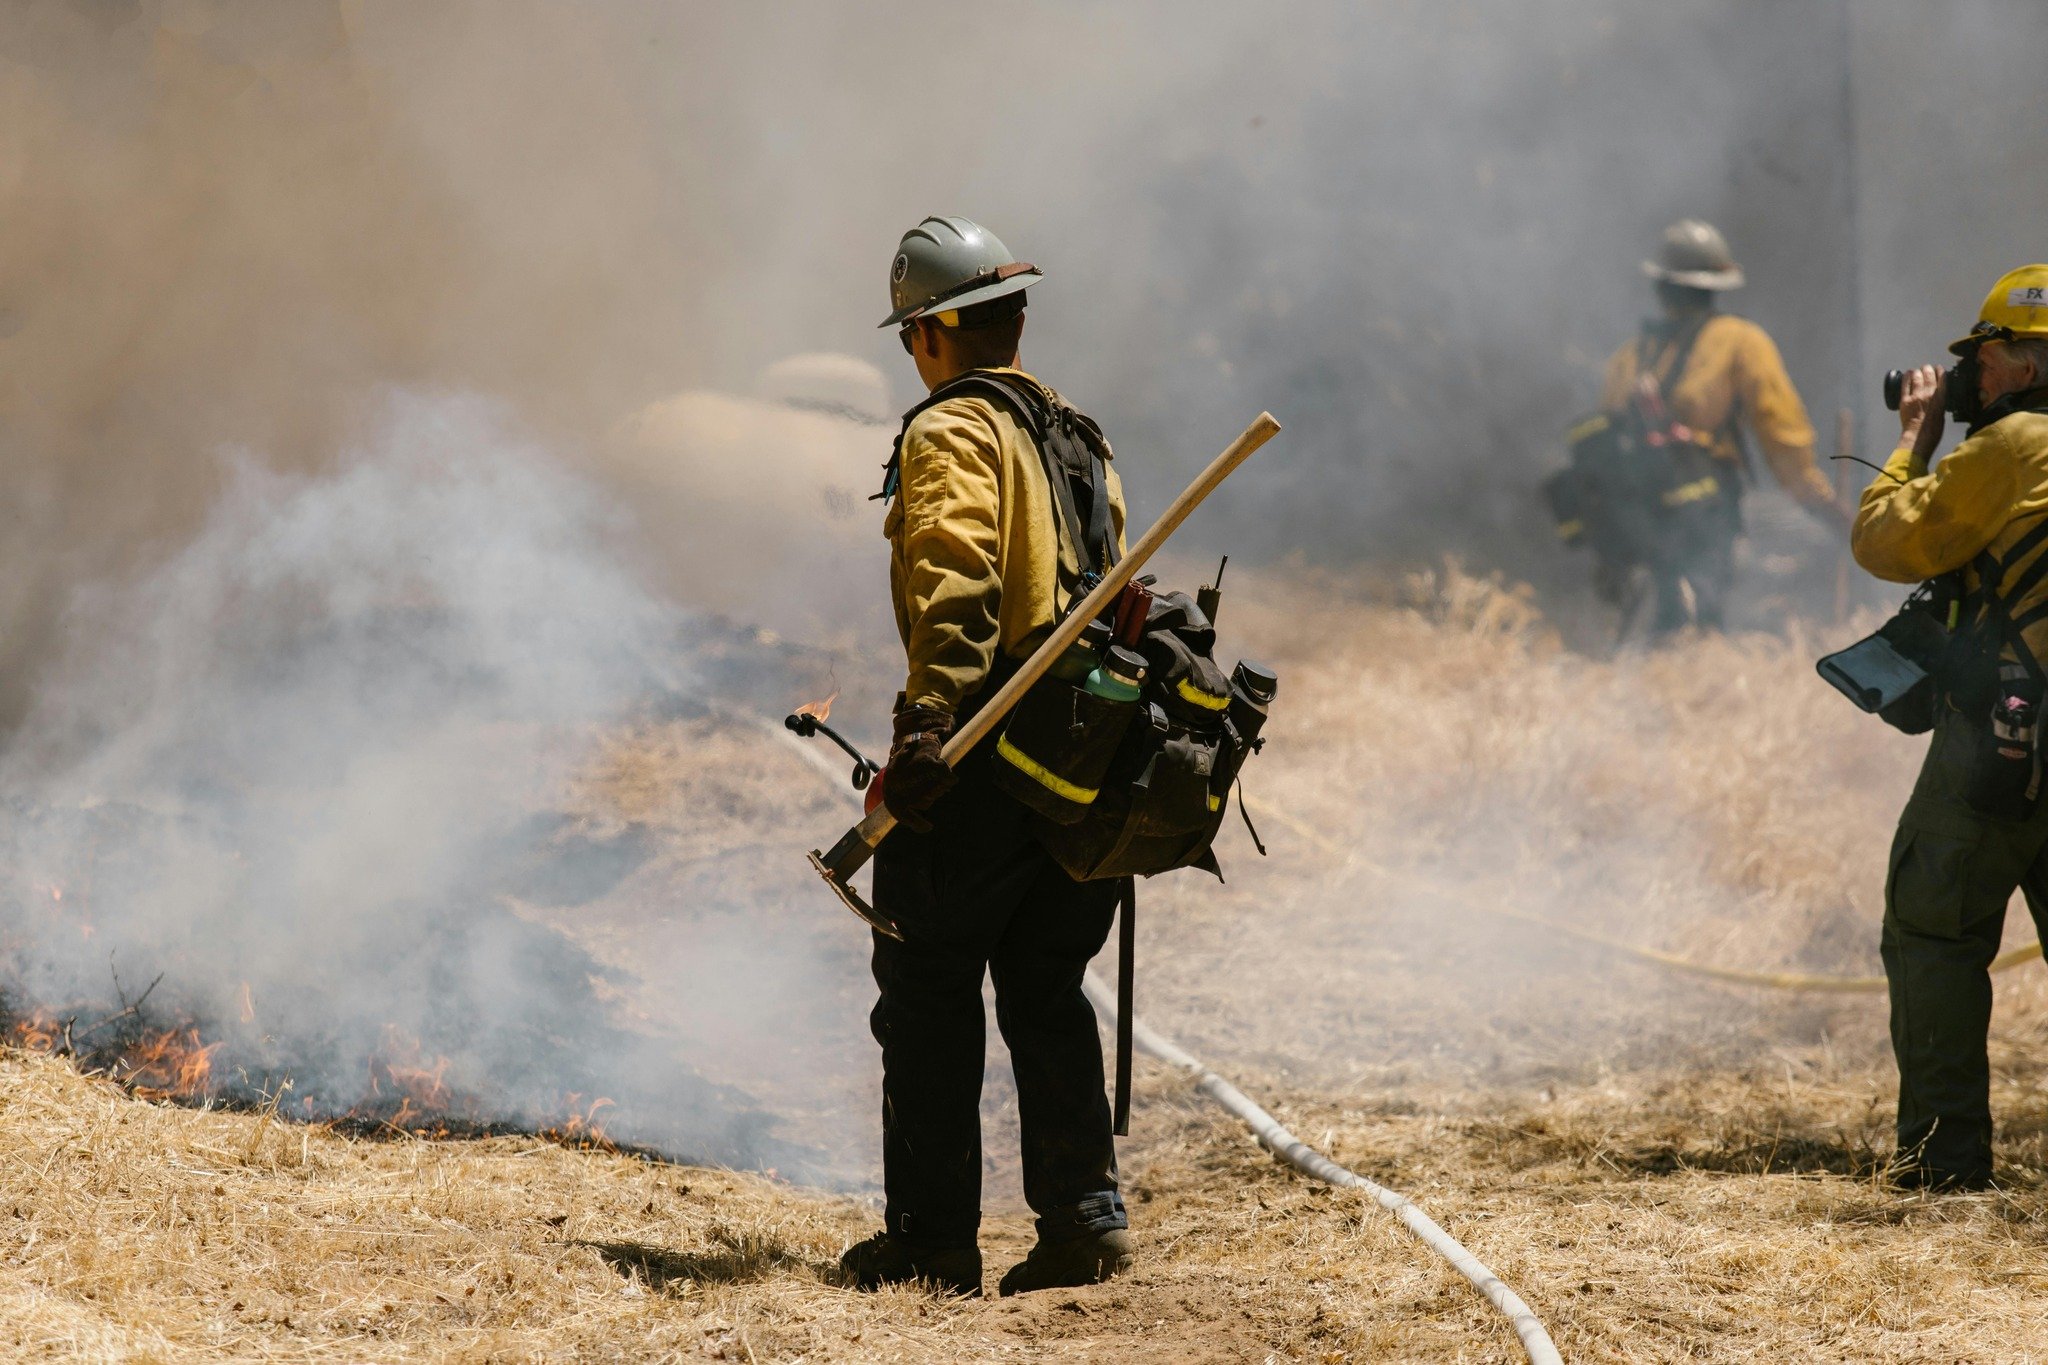 Ready, Set, Prepared! 🔥

Fire Season Kickoff with our Wildland Firefighters.

Celebrate the skilled professionals who keep our communities safe.

Get ready for the season with fire safety tips and drills!

#FireSeason
#FirefighterLife
#CrewBossPPE